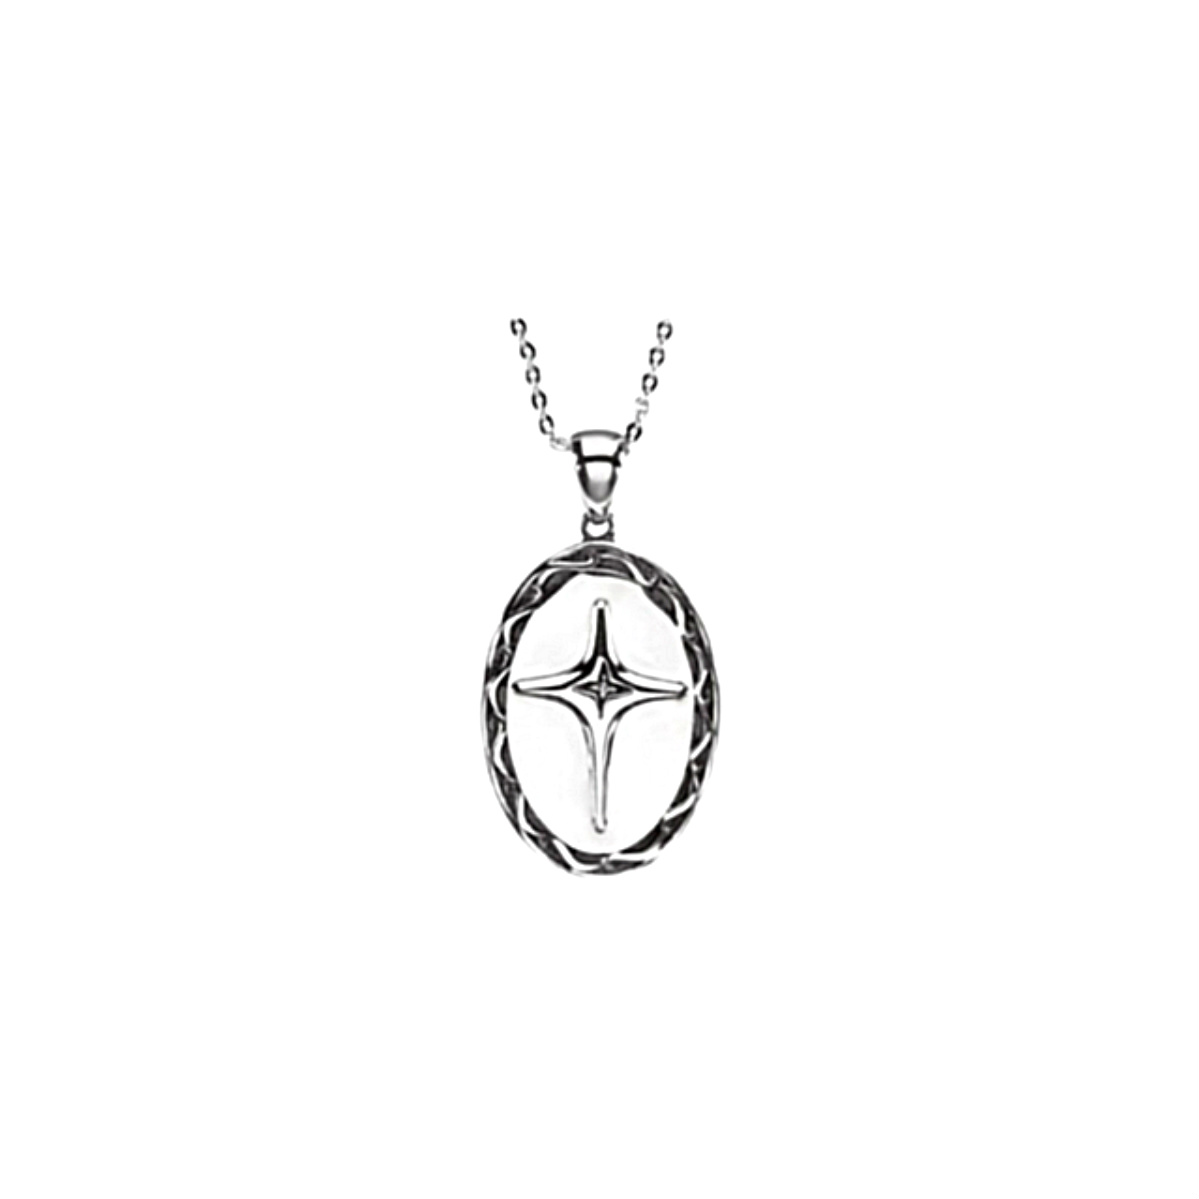 Diamond 'All Things Possible' Rhodium Plate Sterling Silver Cross Pendant Necklace. 